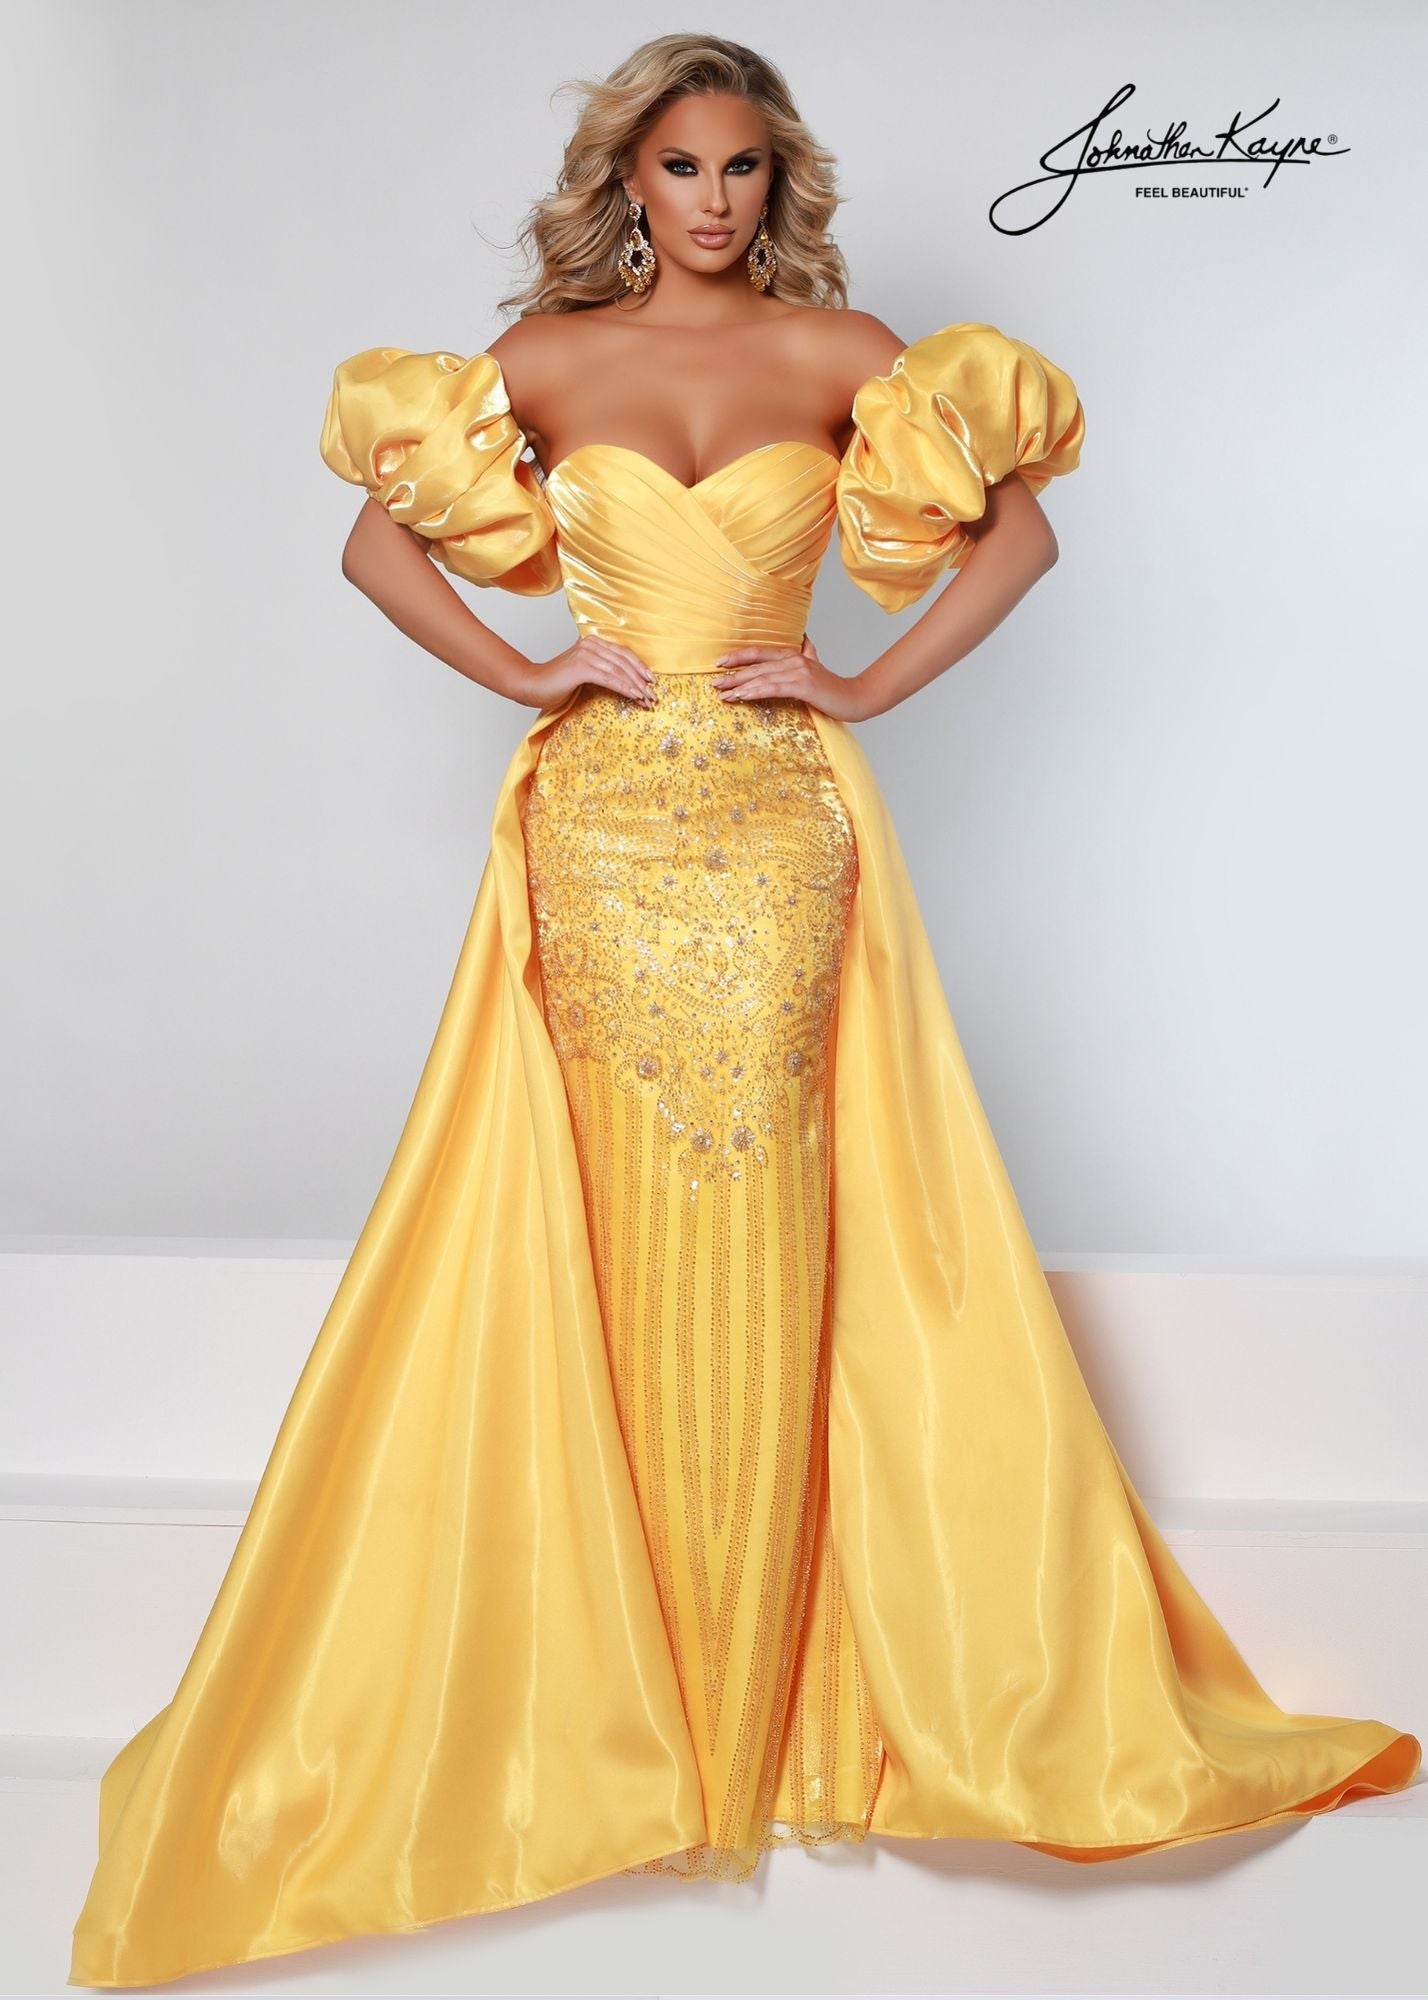 Johnathan Kayne 2502 Shimmer Satin Fitted strapless sweetheart neckline Pageant Dress. Crystal Rhinestone Embellished Bodice with a flowing Overskirt. This Formal Gown Features removable Puff Sleeves for a Fairy Tale Look!  Available Sizes: 00, 0, 2, 4, 6, 8, 10, 12, 14, 16  Available Colors: Marigold, White